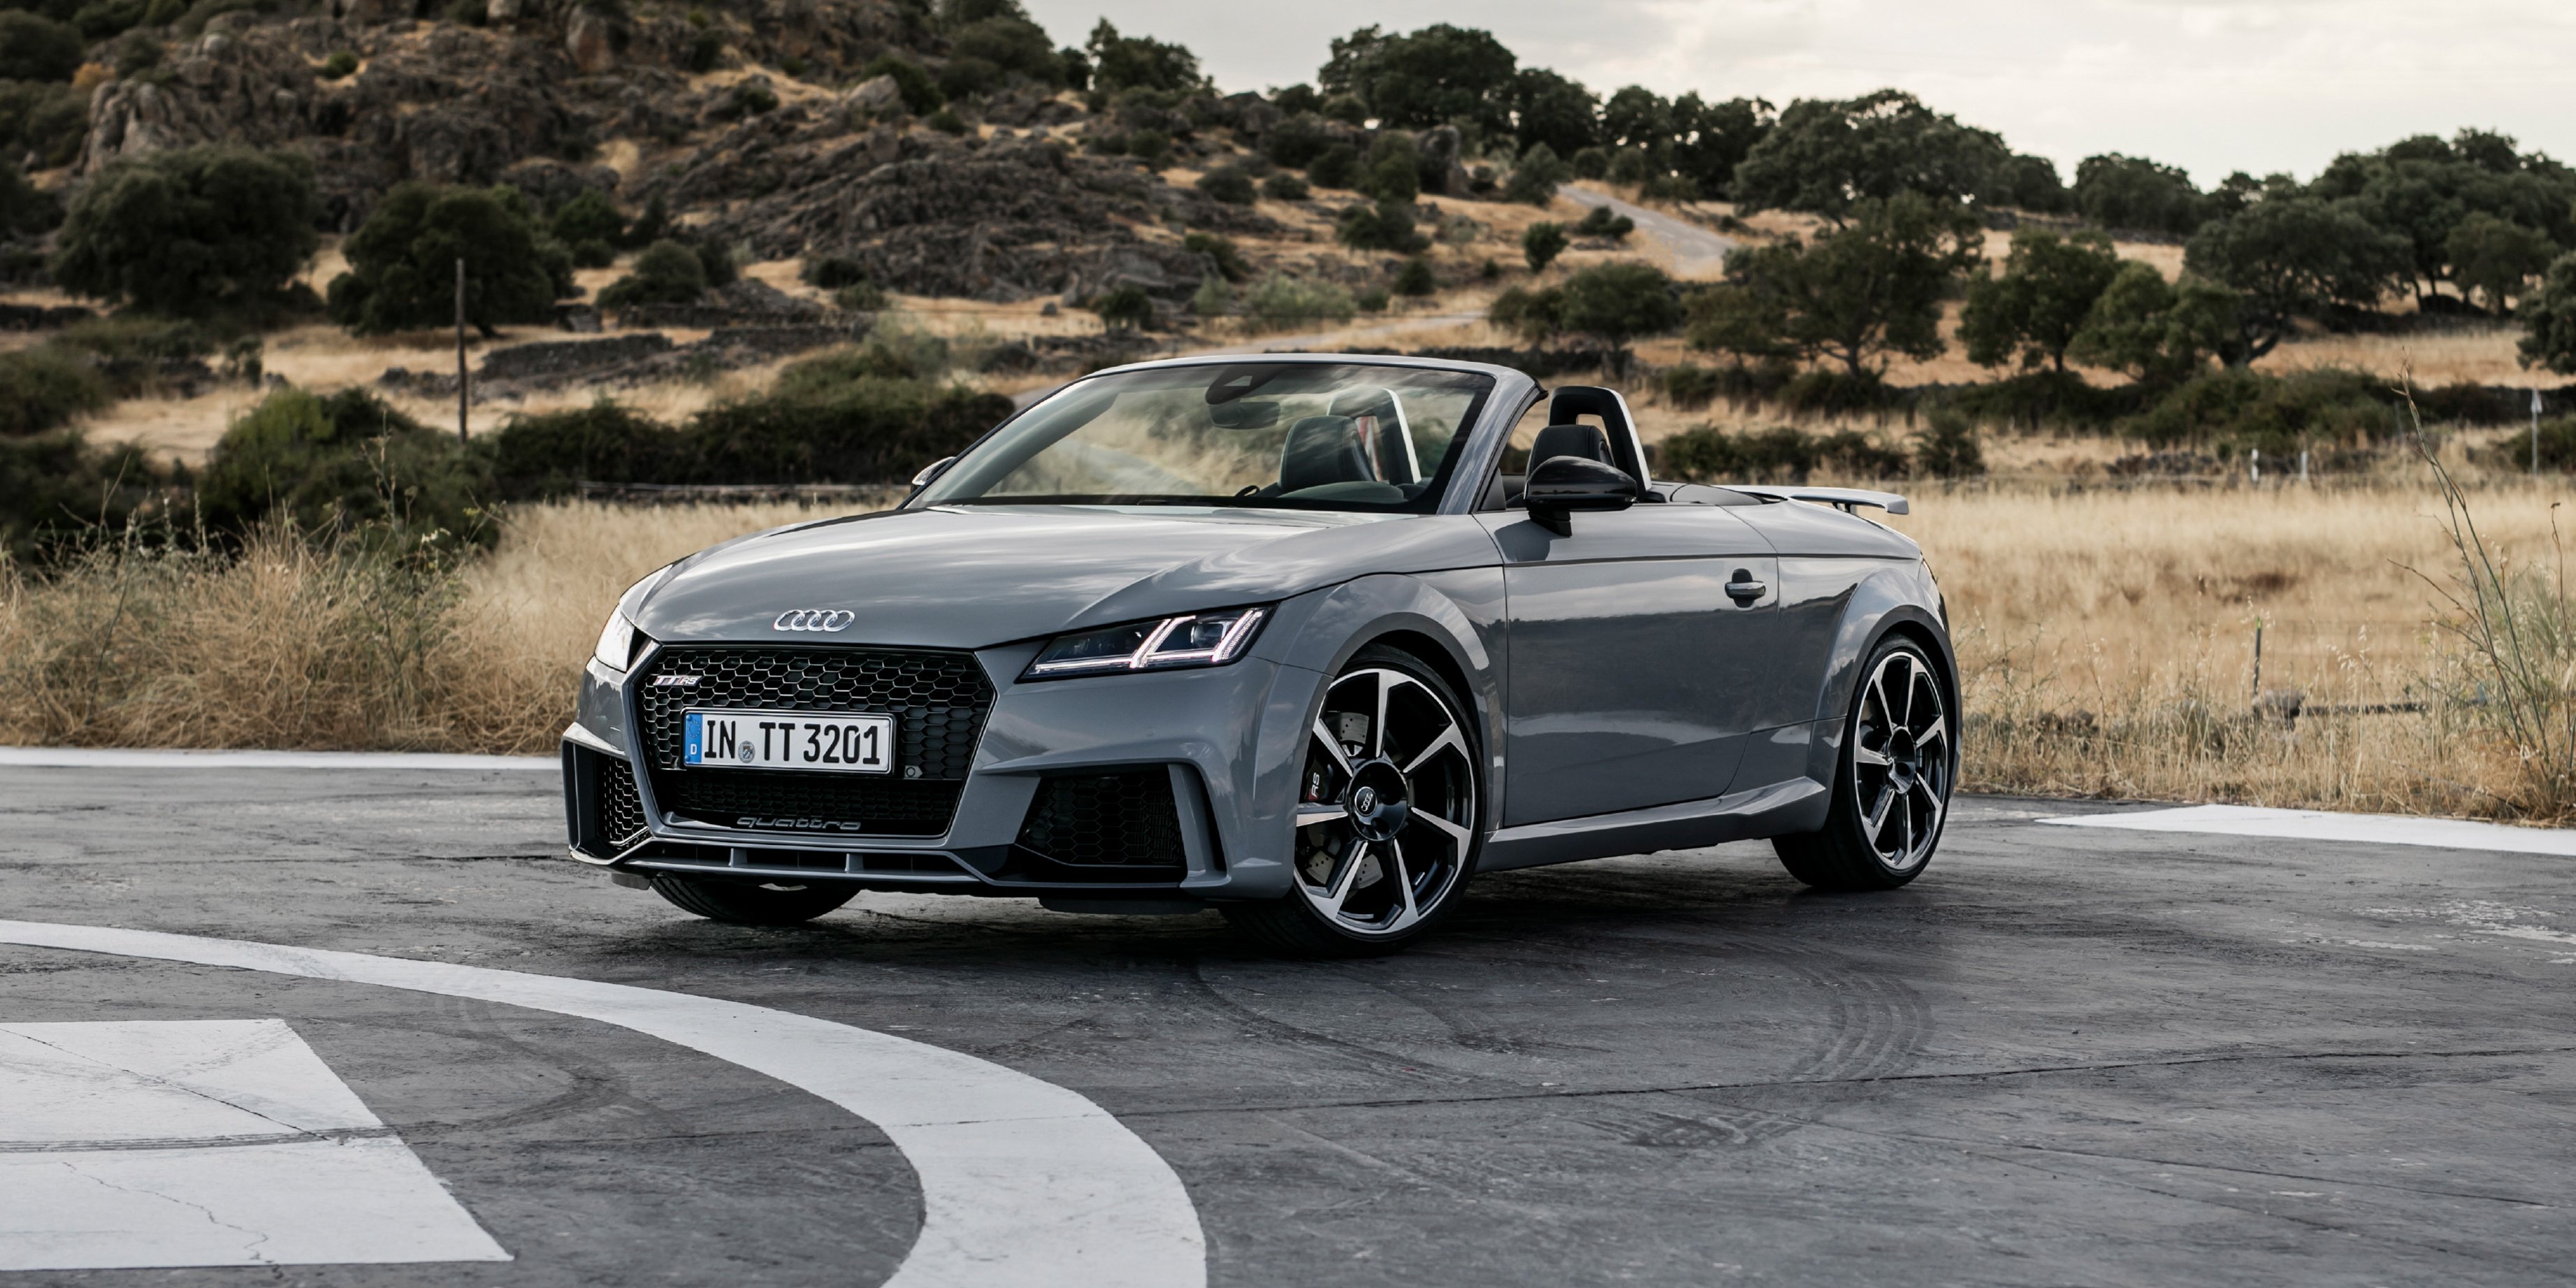 New Audi TT RS in Australia mid-2017, priced from around $145k - Photos ...